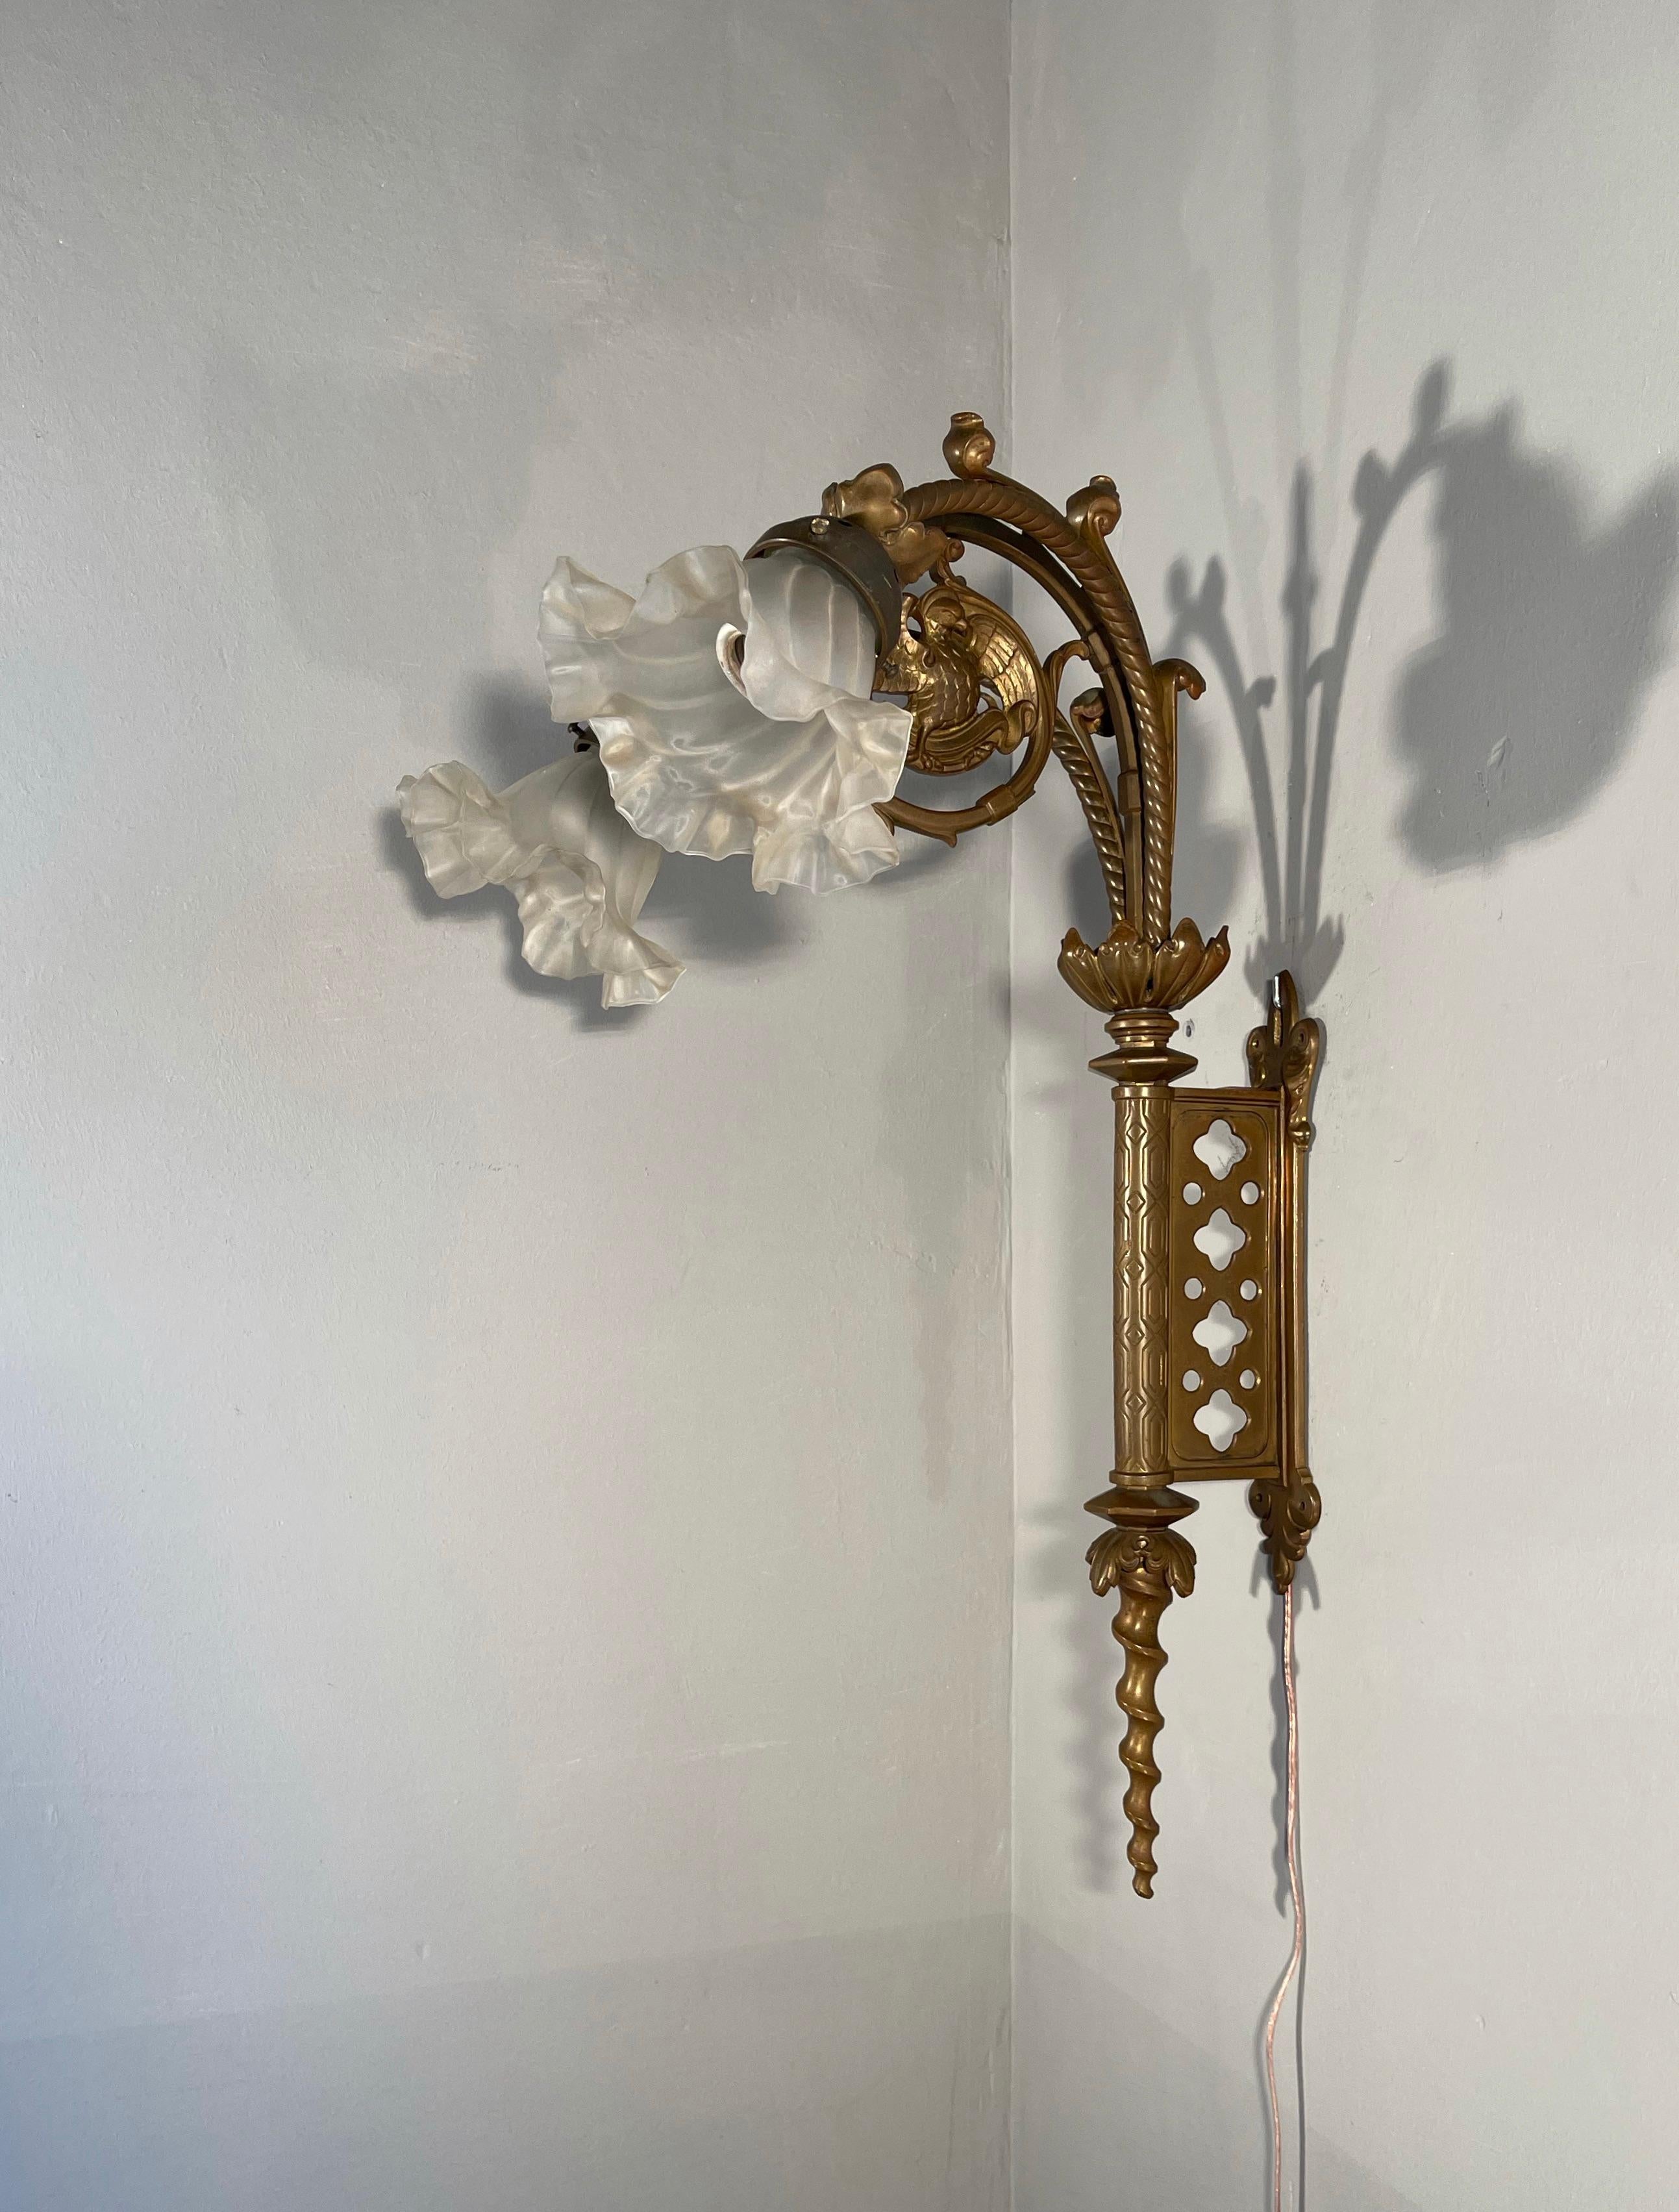 Unique Gothic Revival light fixture for wall mounting.

This antique Gothic wall sconce with two flowery glass shades is another one of those antiques of which you immediately realize that it ticks all the boxes. Perfectly handcrafted in the